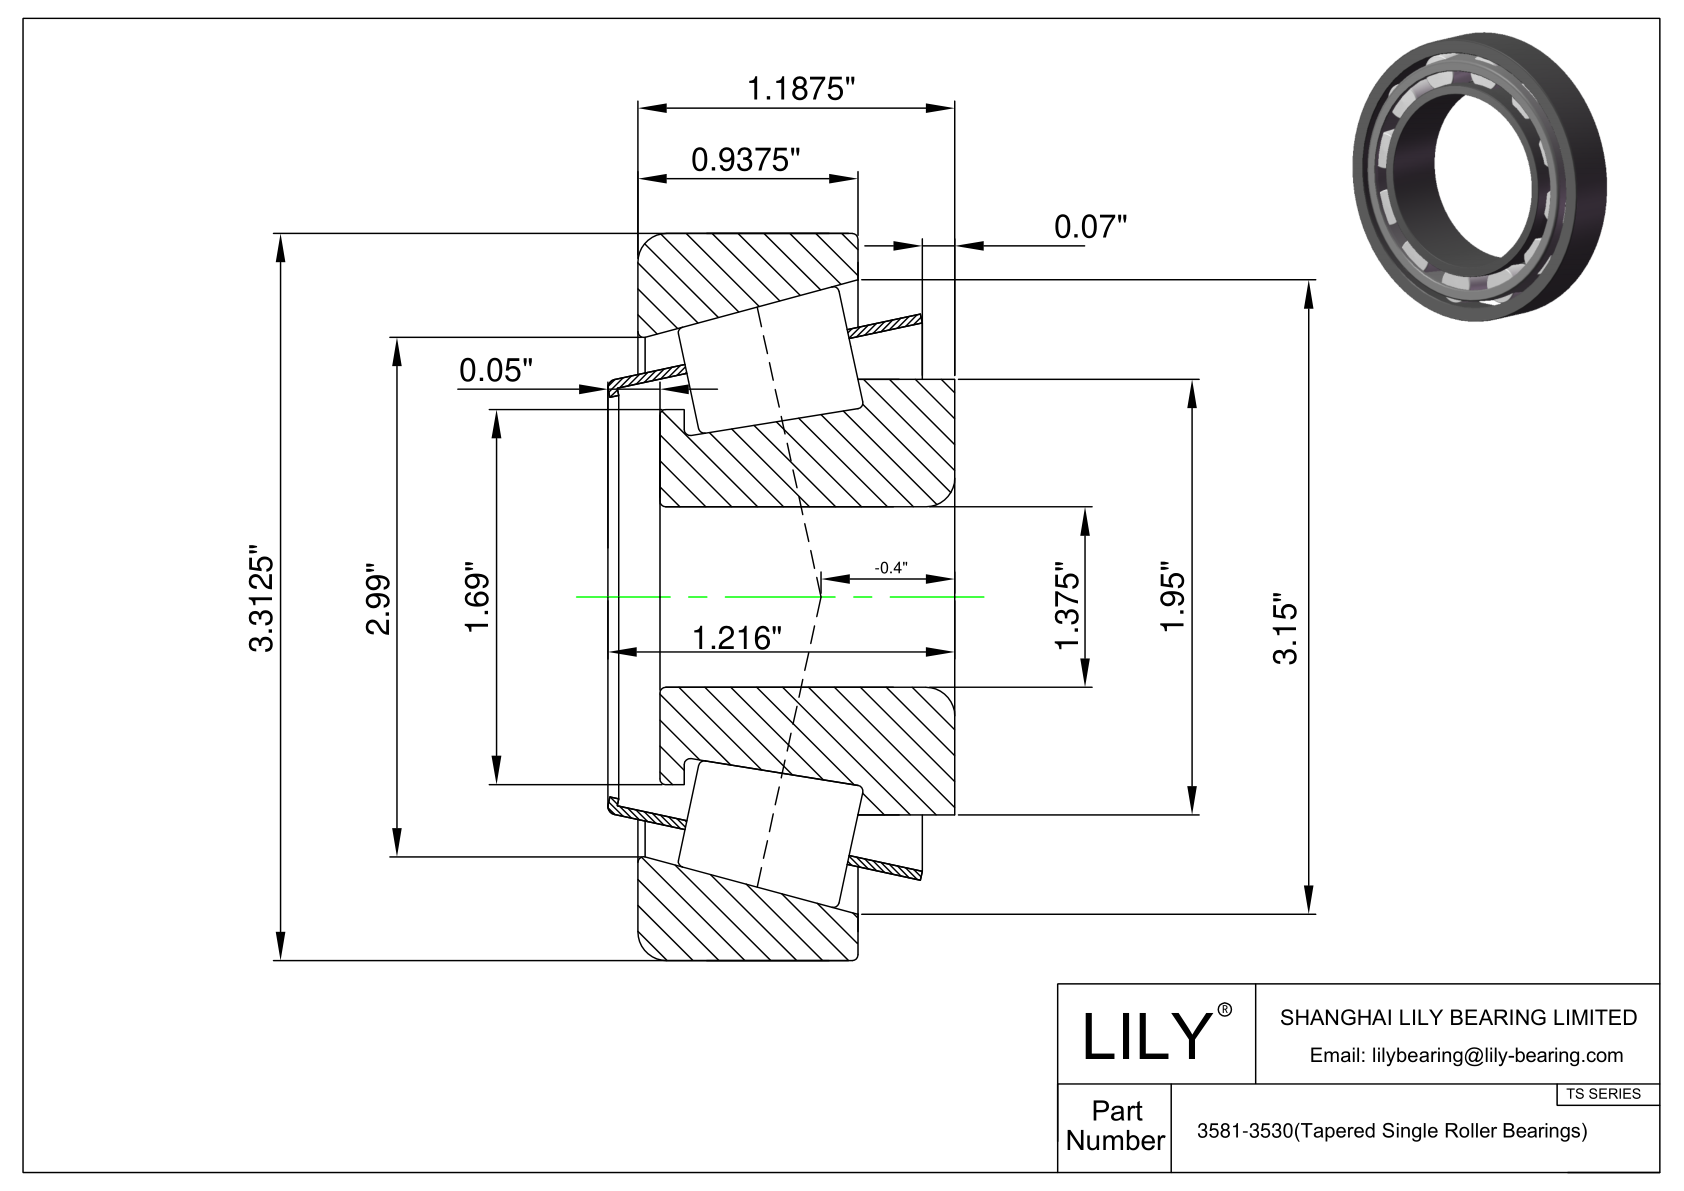 3581-3530 TS (Tapered Single Roller Bearings) (Imperial) cad drawing